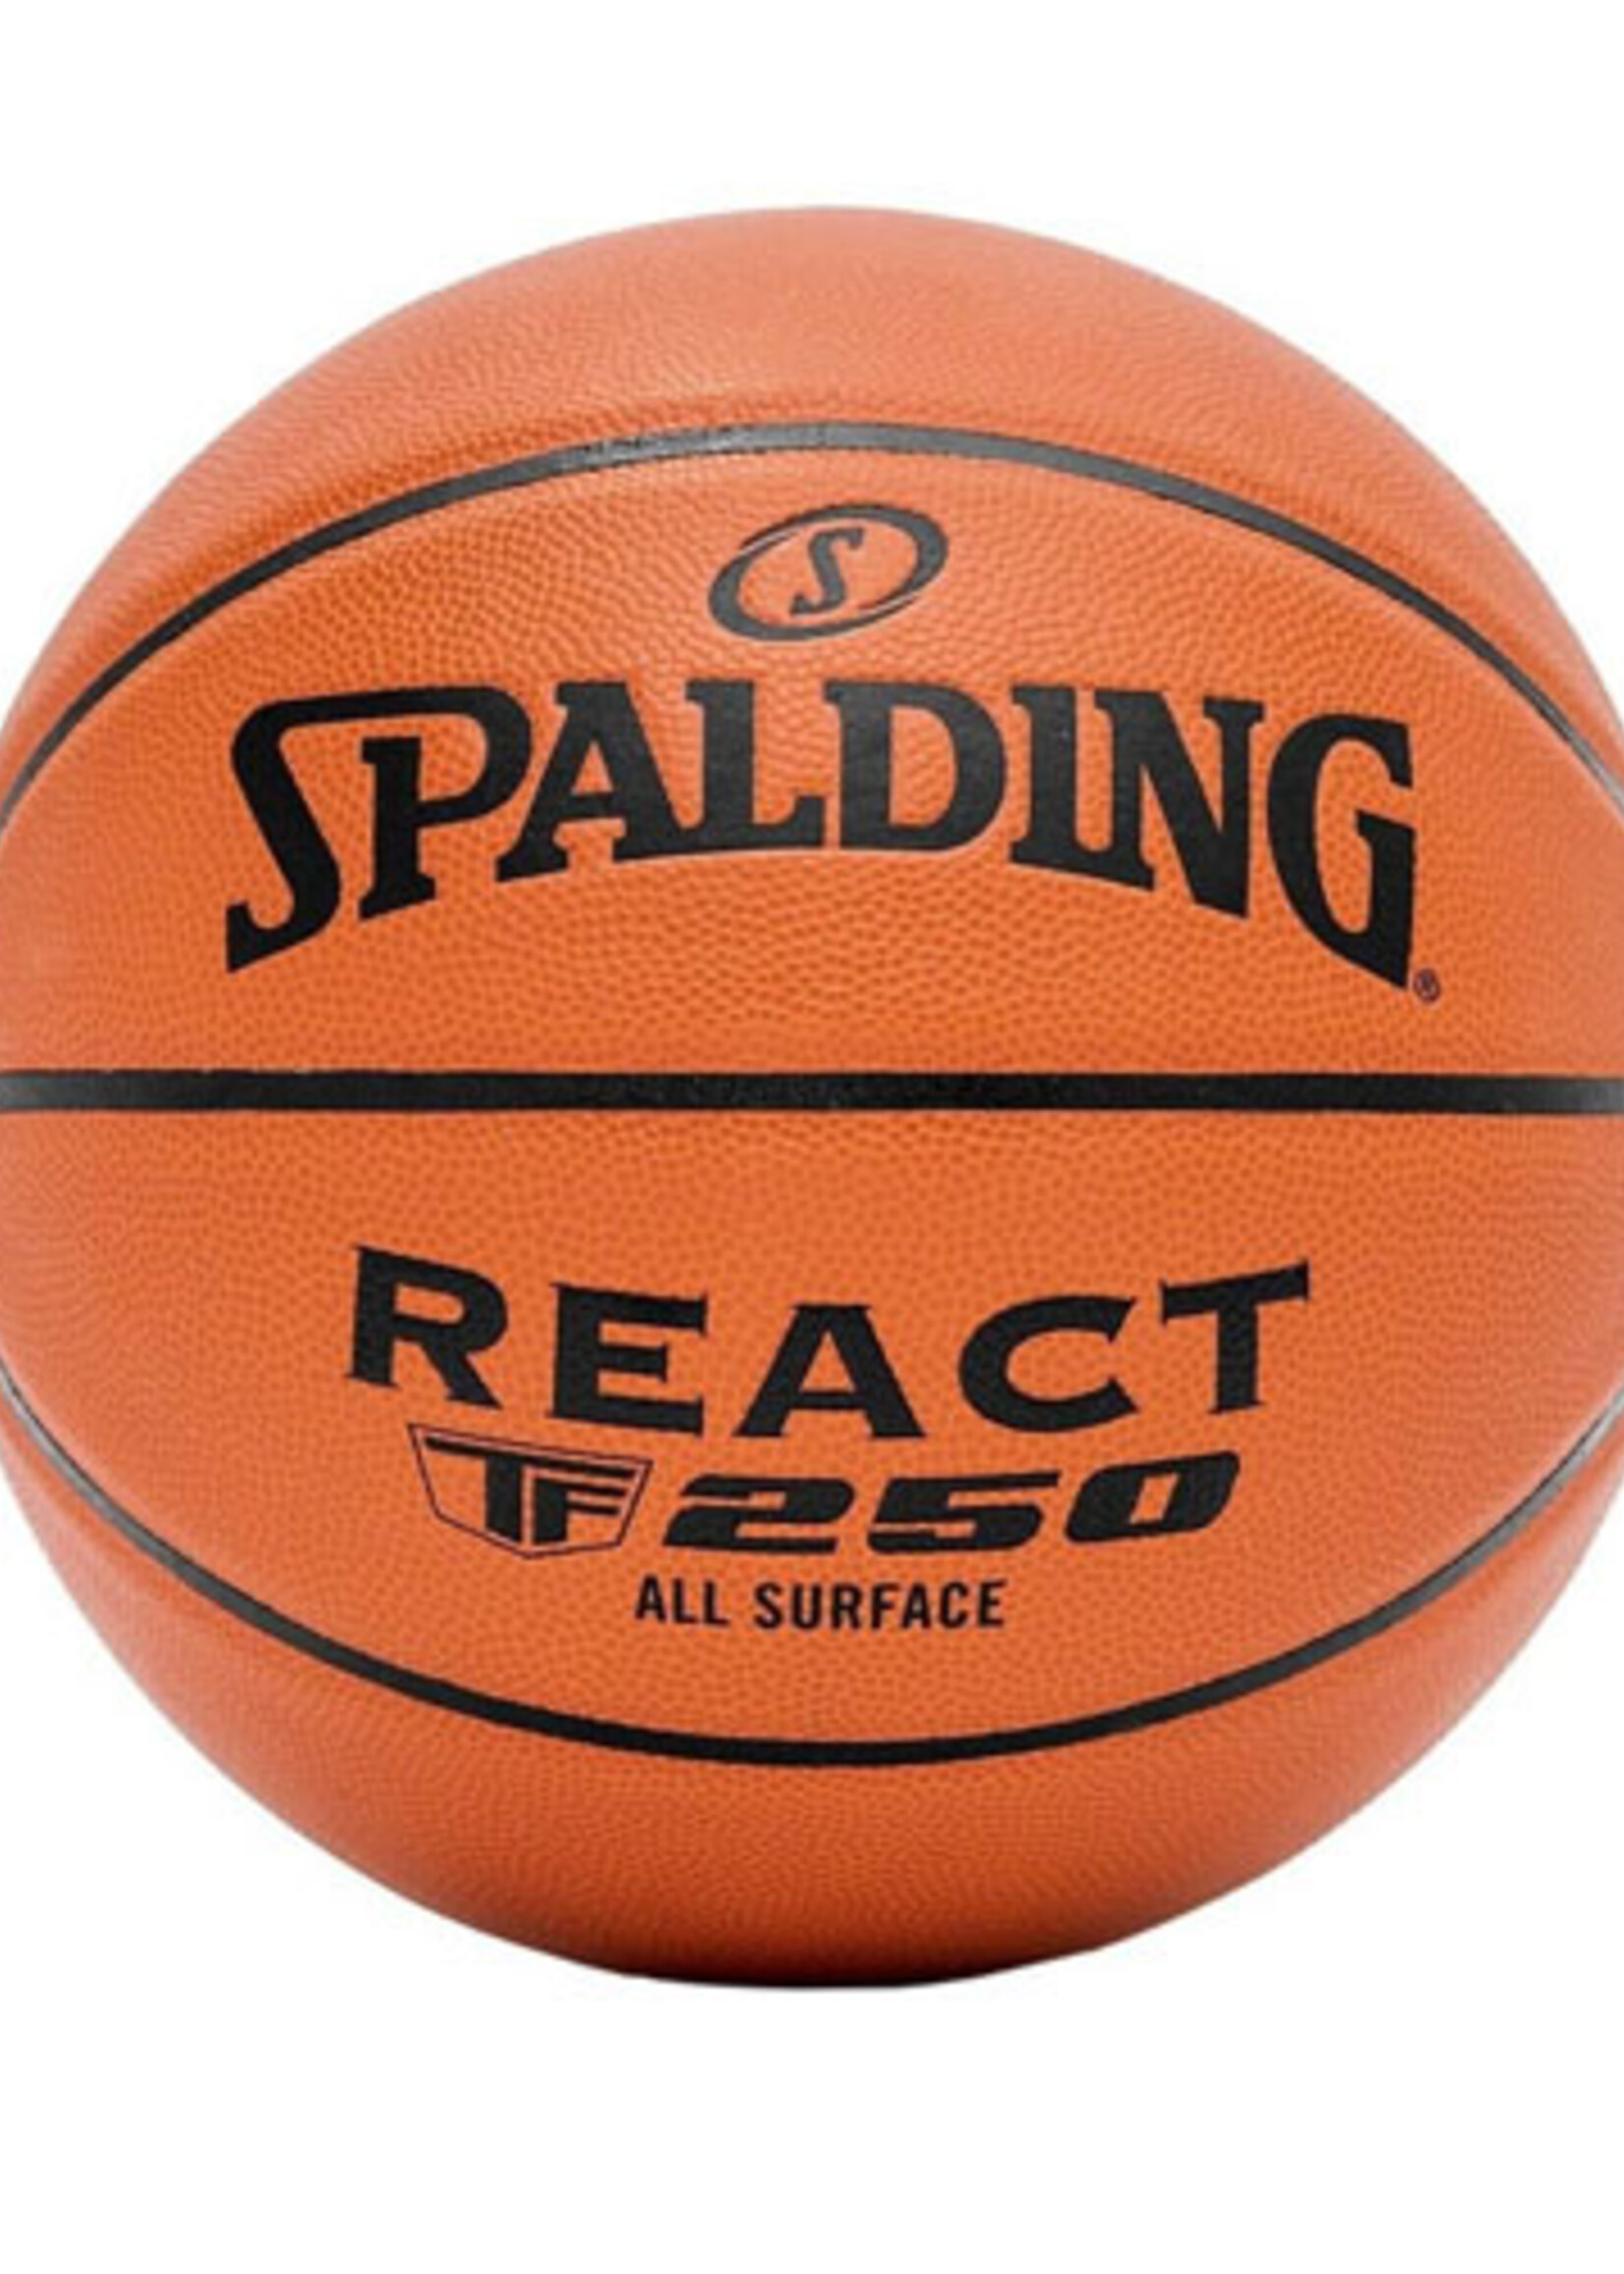 Spalding Spalding React TF-250 All Surface Indoor & Outdoor Basketball